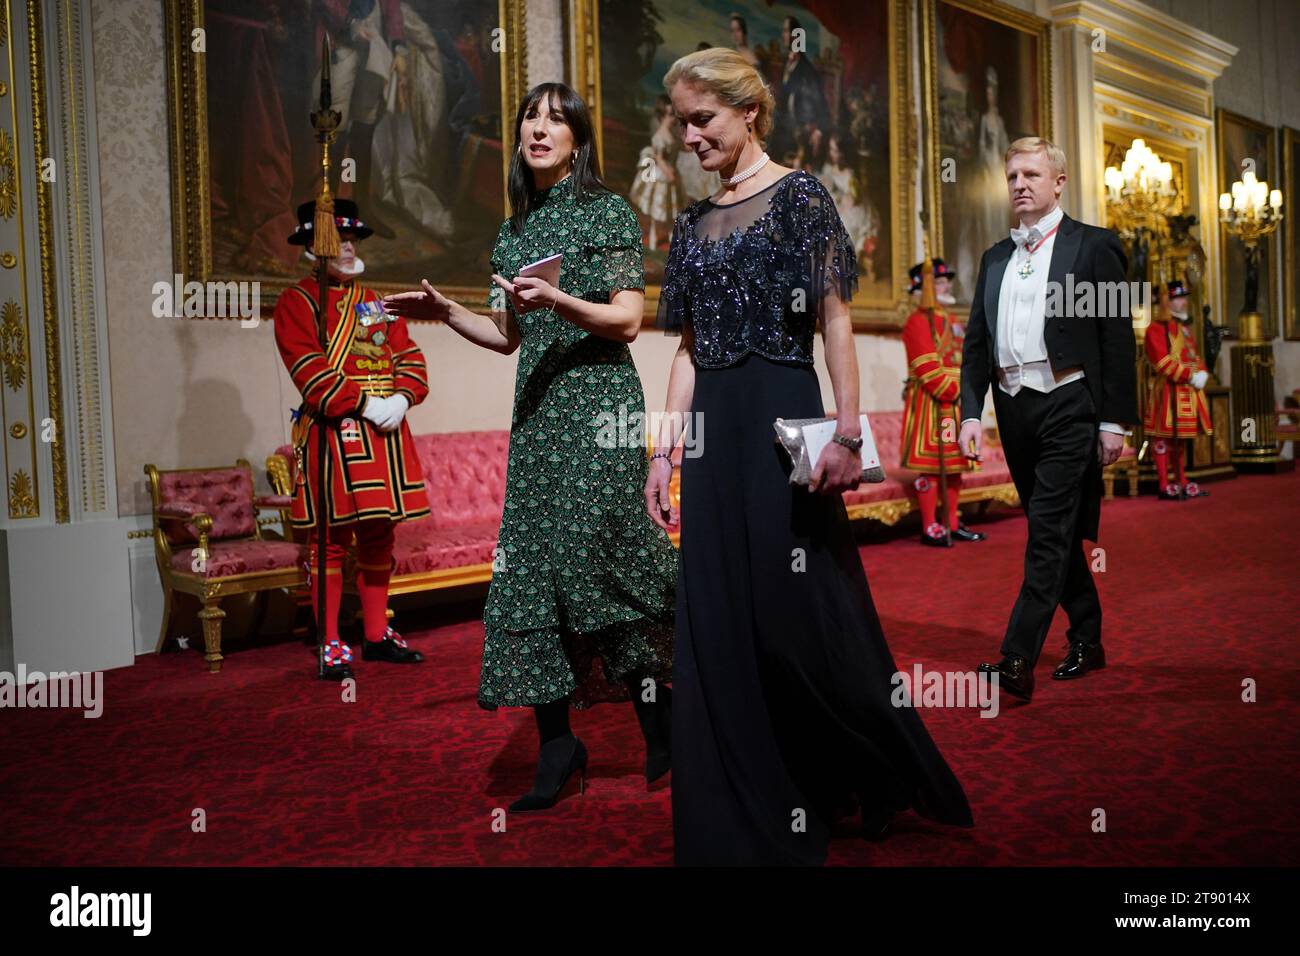 Lady Samantha Cameron arriving for the State Banquet at Buckingham ...